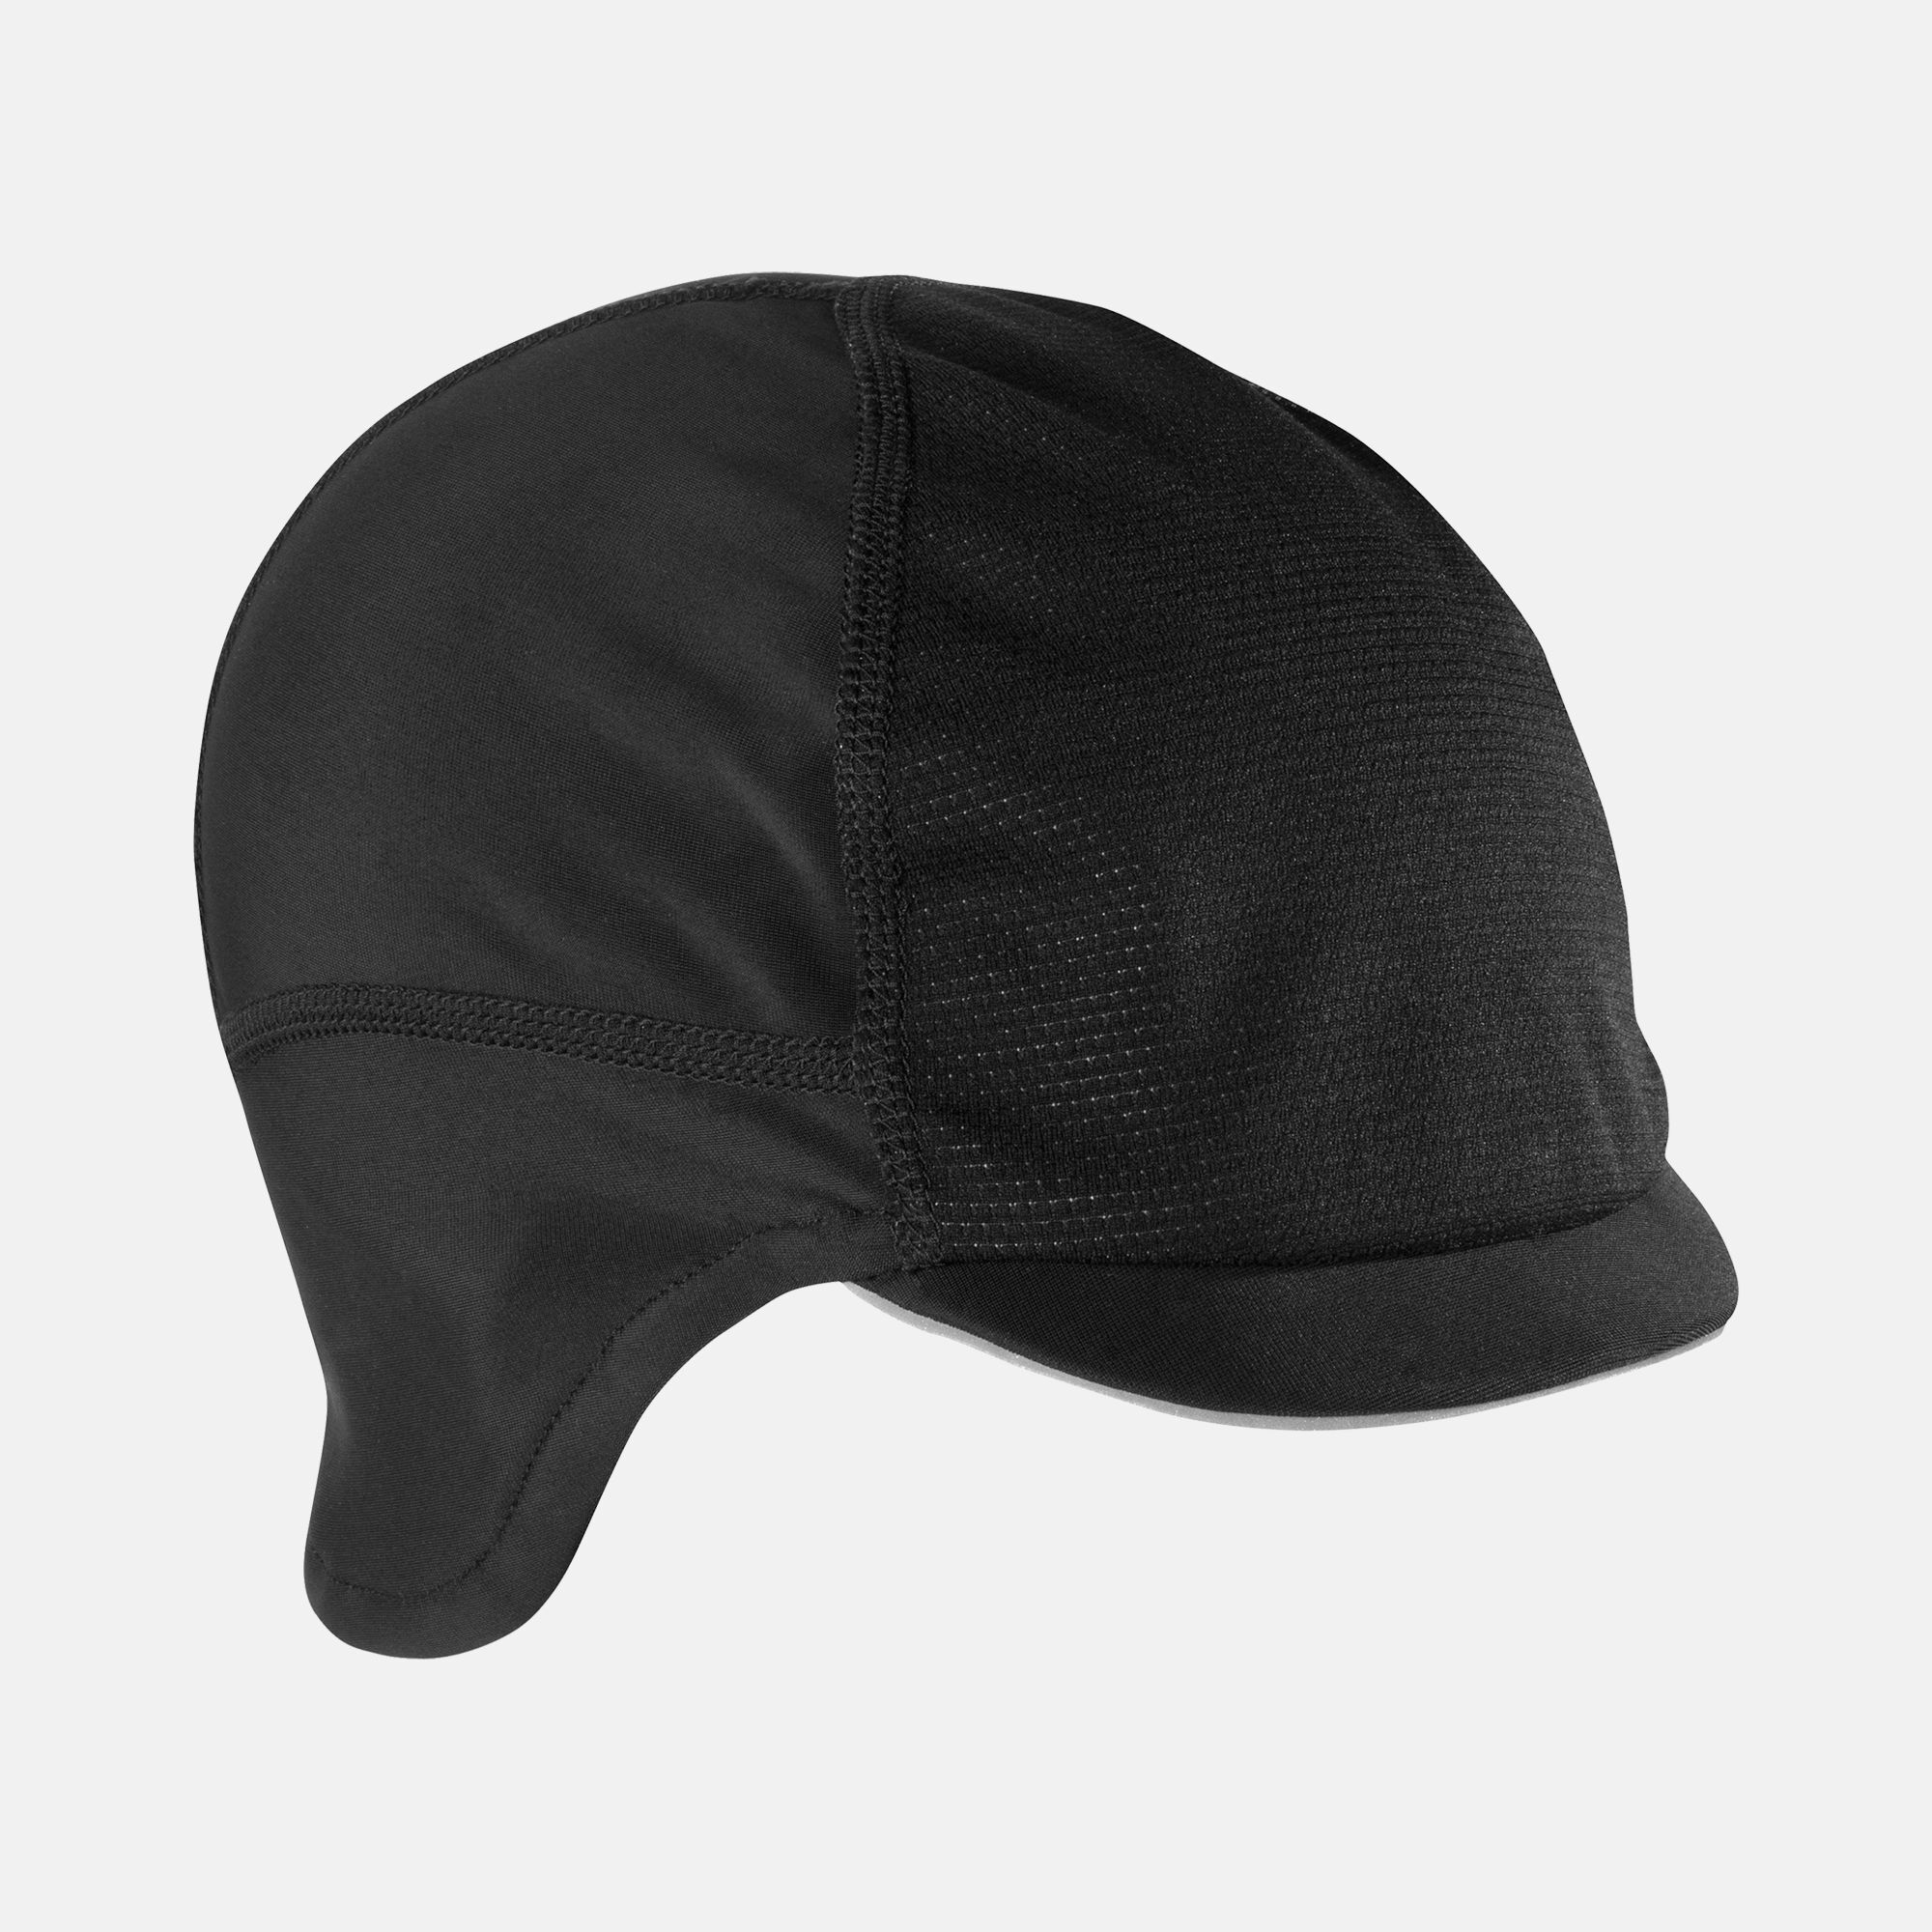 Breathable Hat Cycling Ski Winter Cap Under Helmet with Ear Covers Dark Gray 